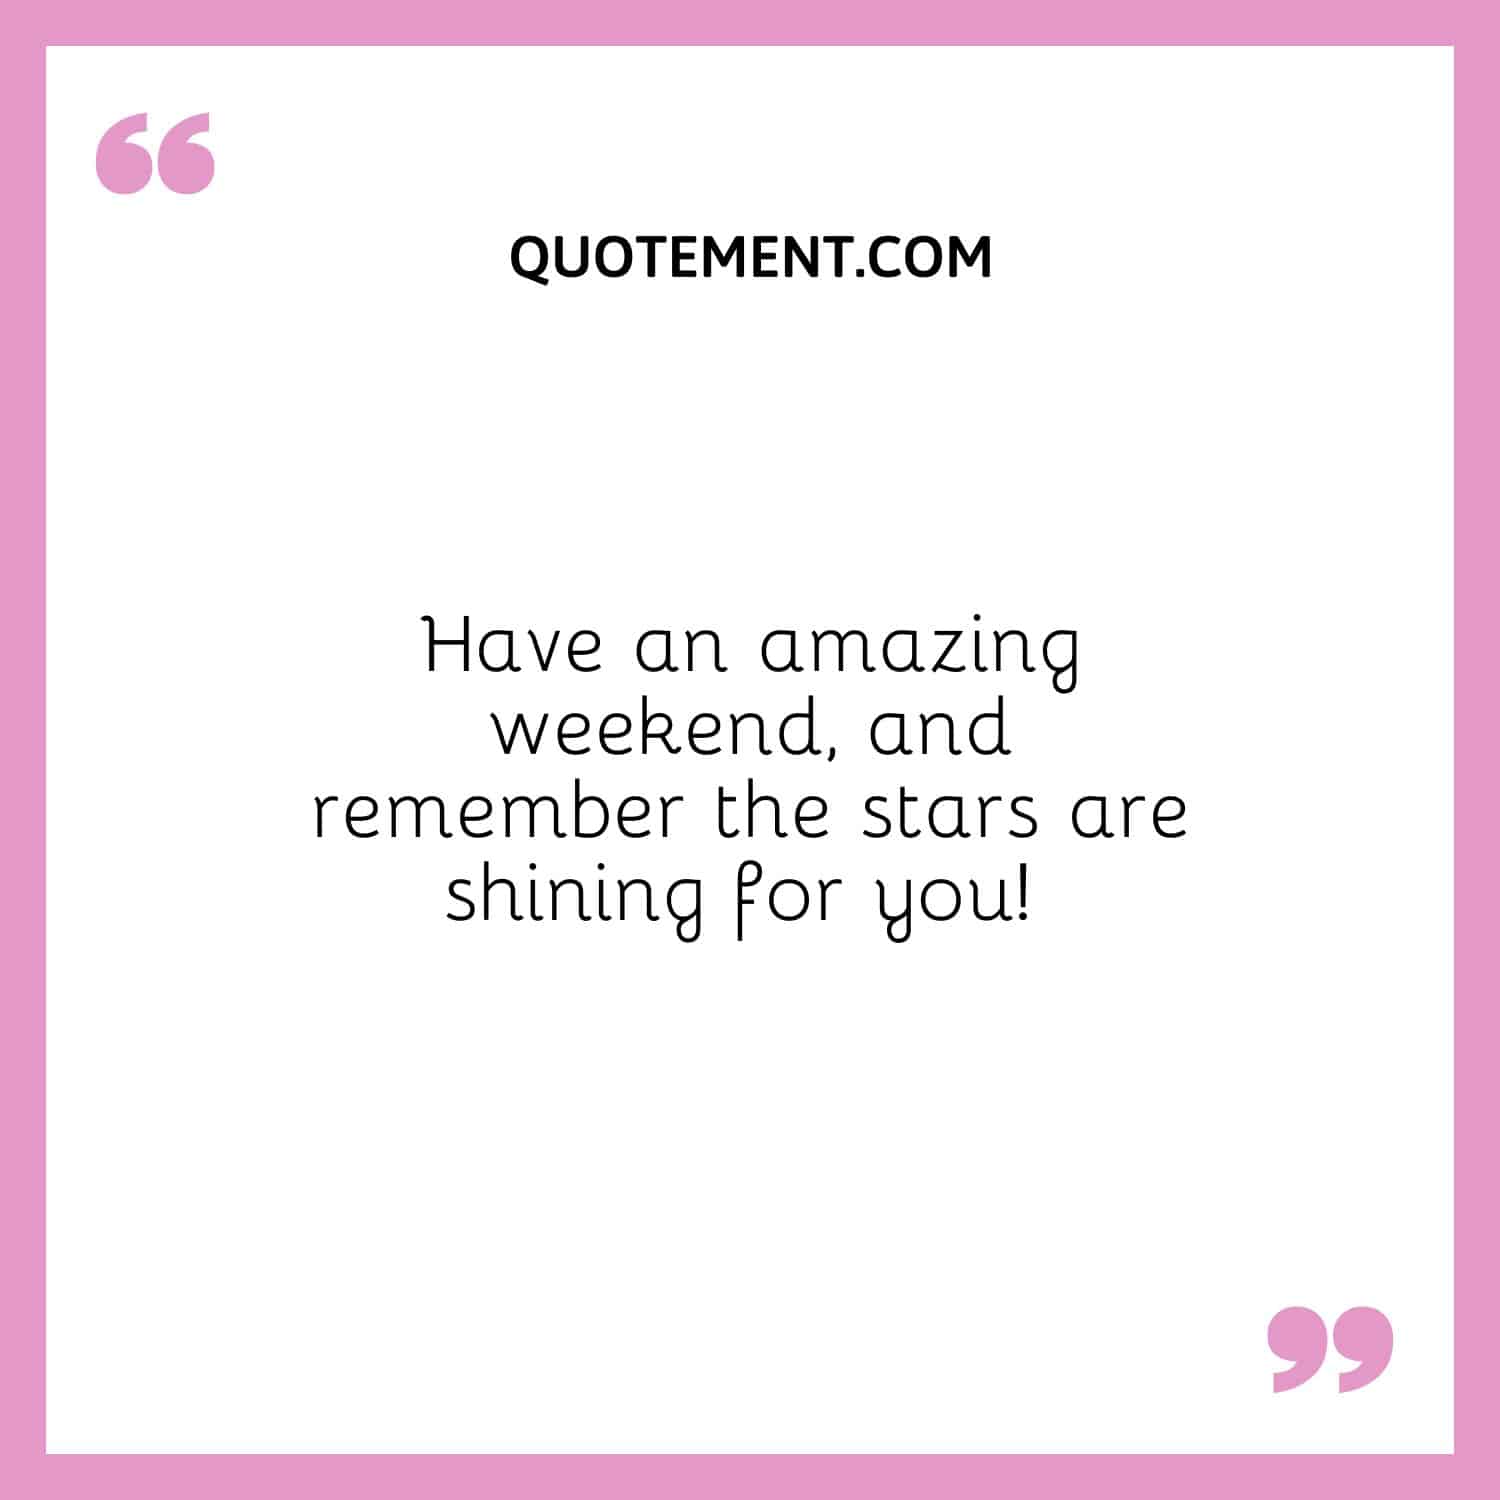 Have an amazing weekend